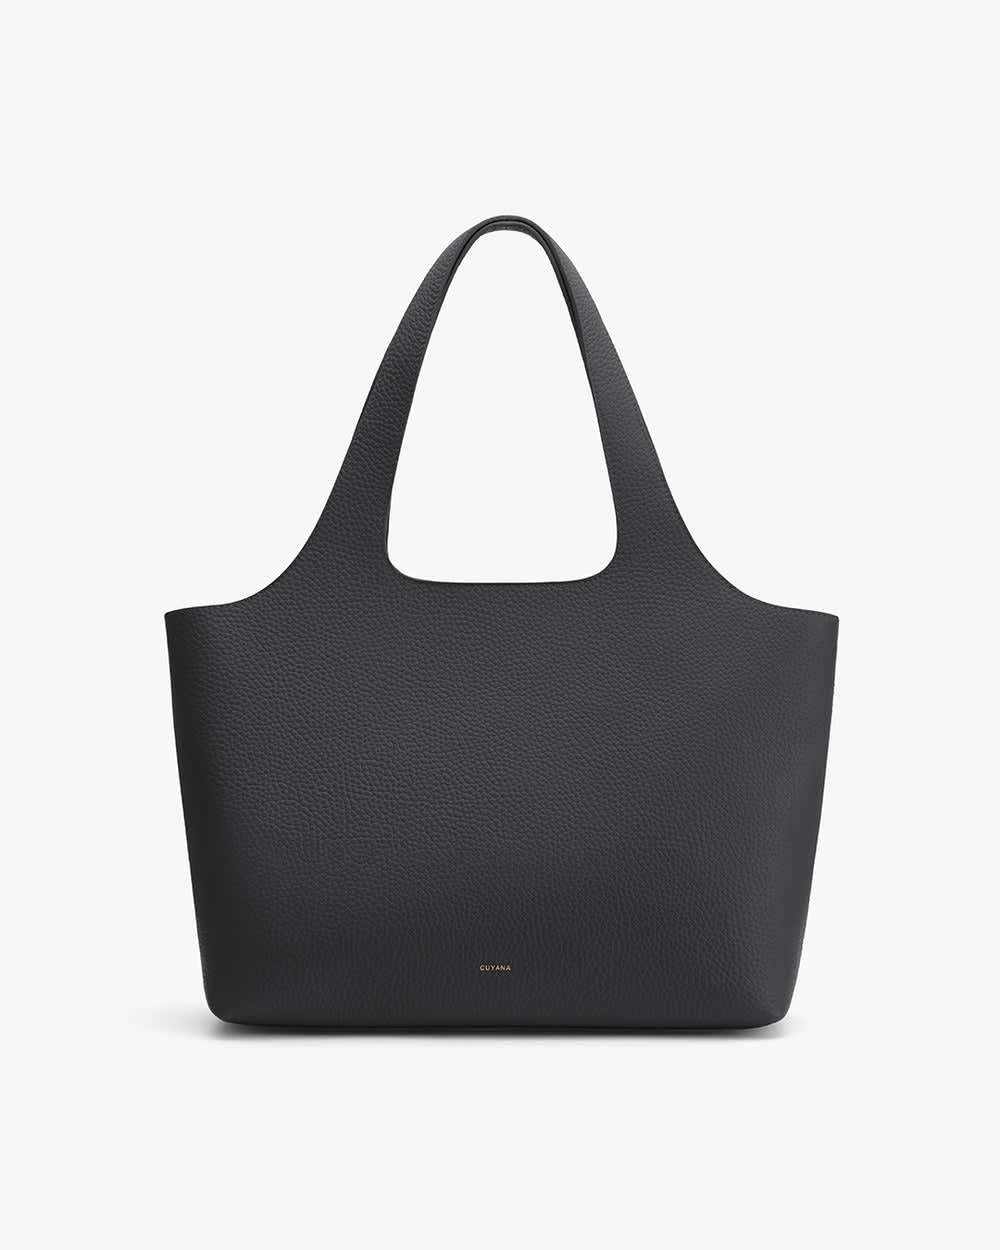 Best Tote Bags for Work: Best Canvas & Leather Tote Bags for Commutes